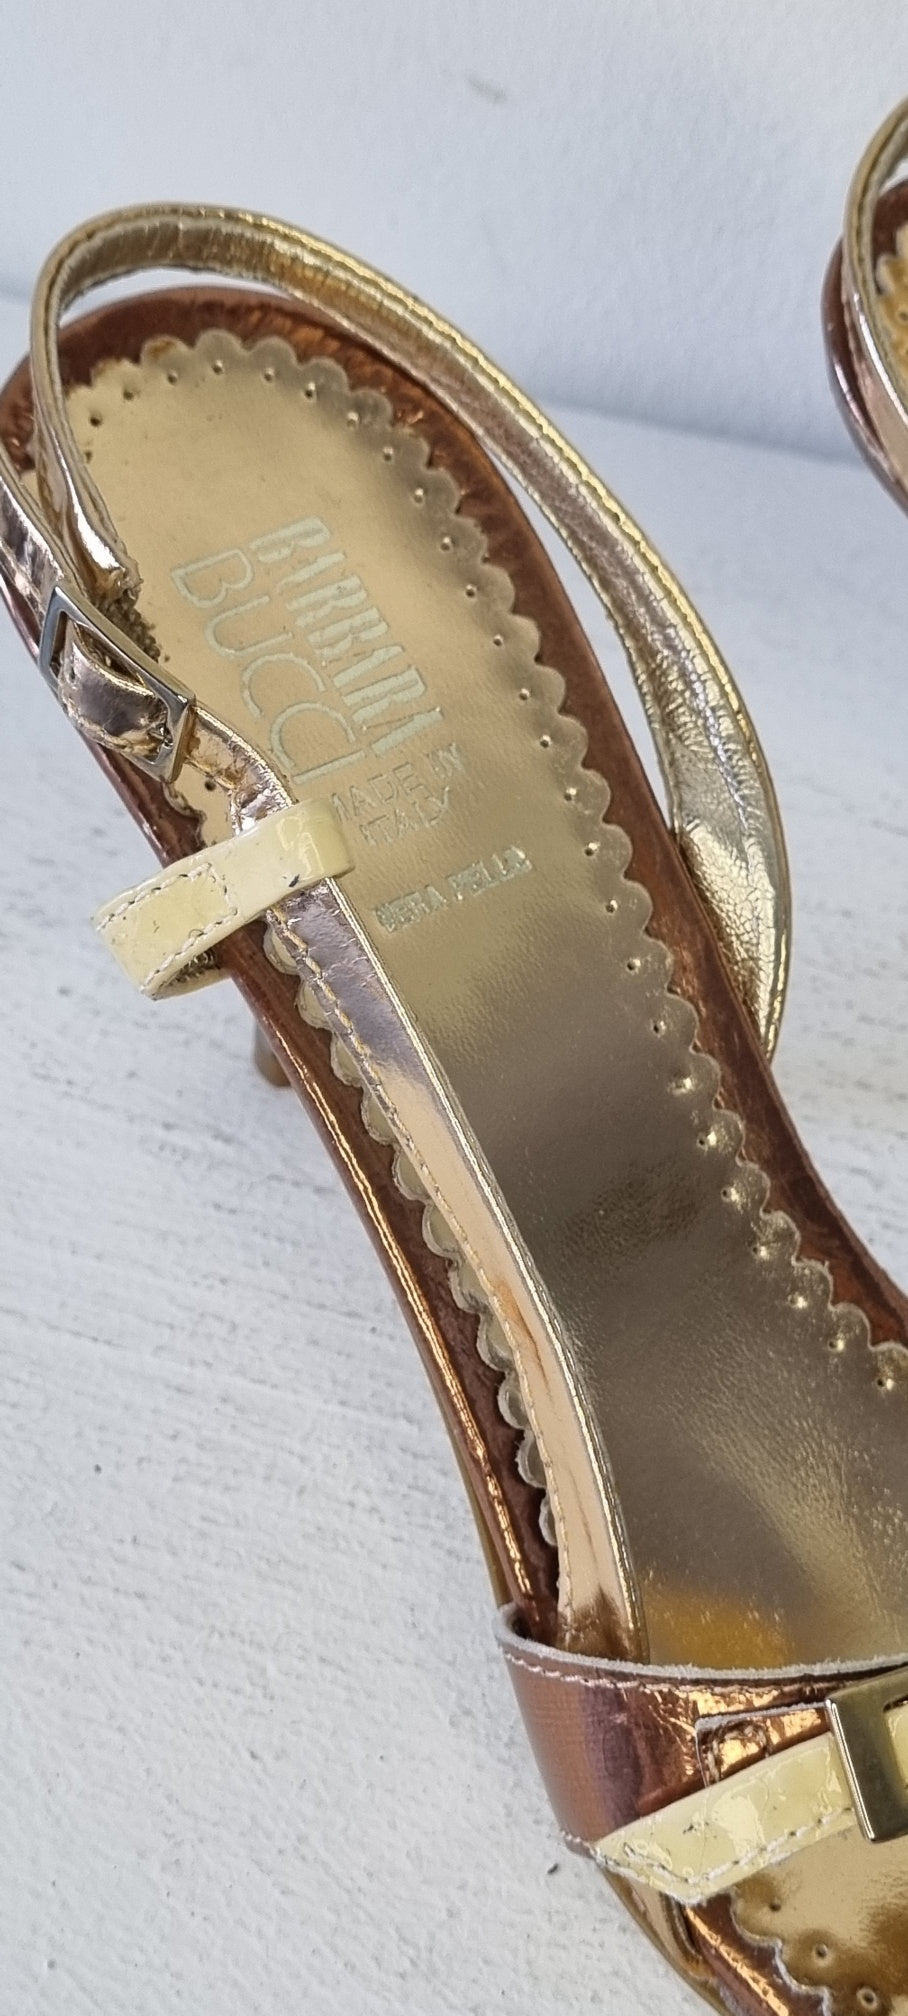 Barbara Bucci - Vera Pelle made in Italy - Gold Upper And Silver Heeled Designer Vintage Sandals